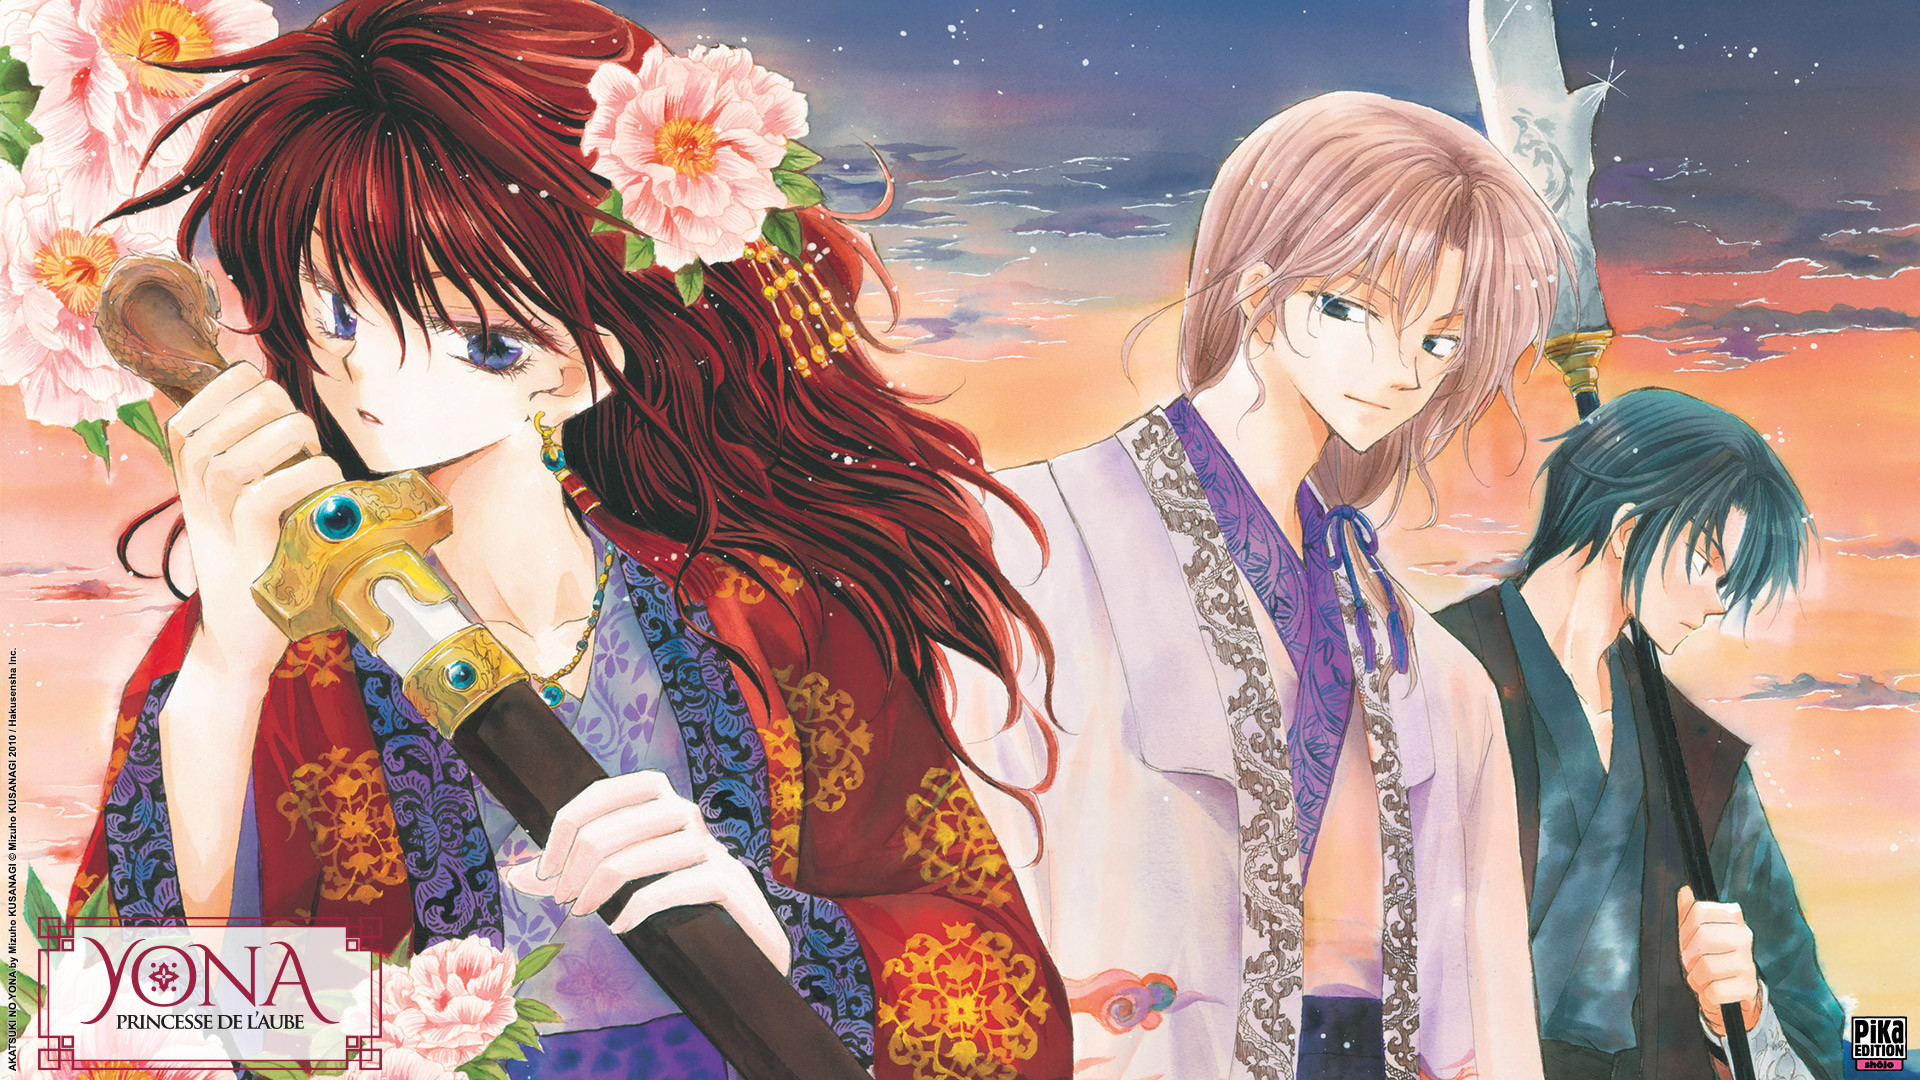 1920x1080 Akatsuki no Yona wallpapers released by the french publisher Pika .